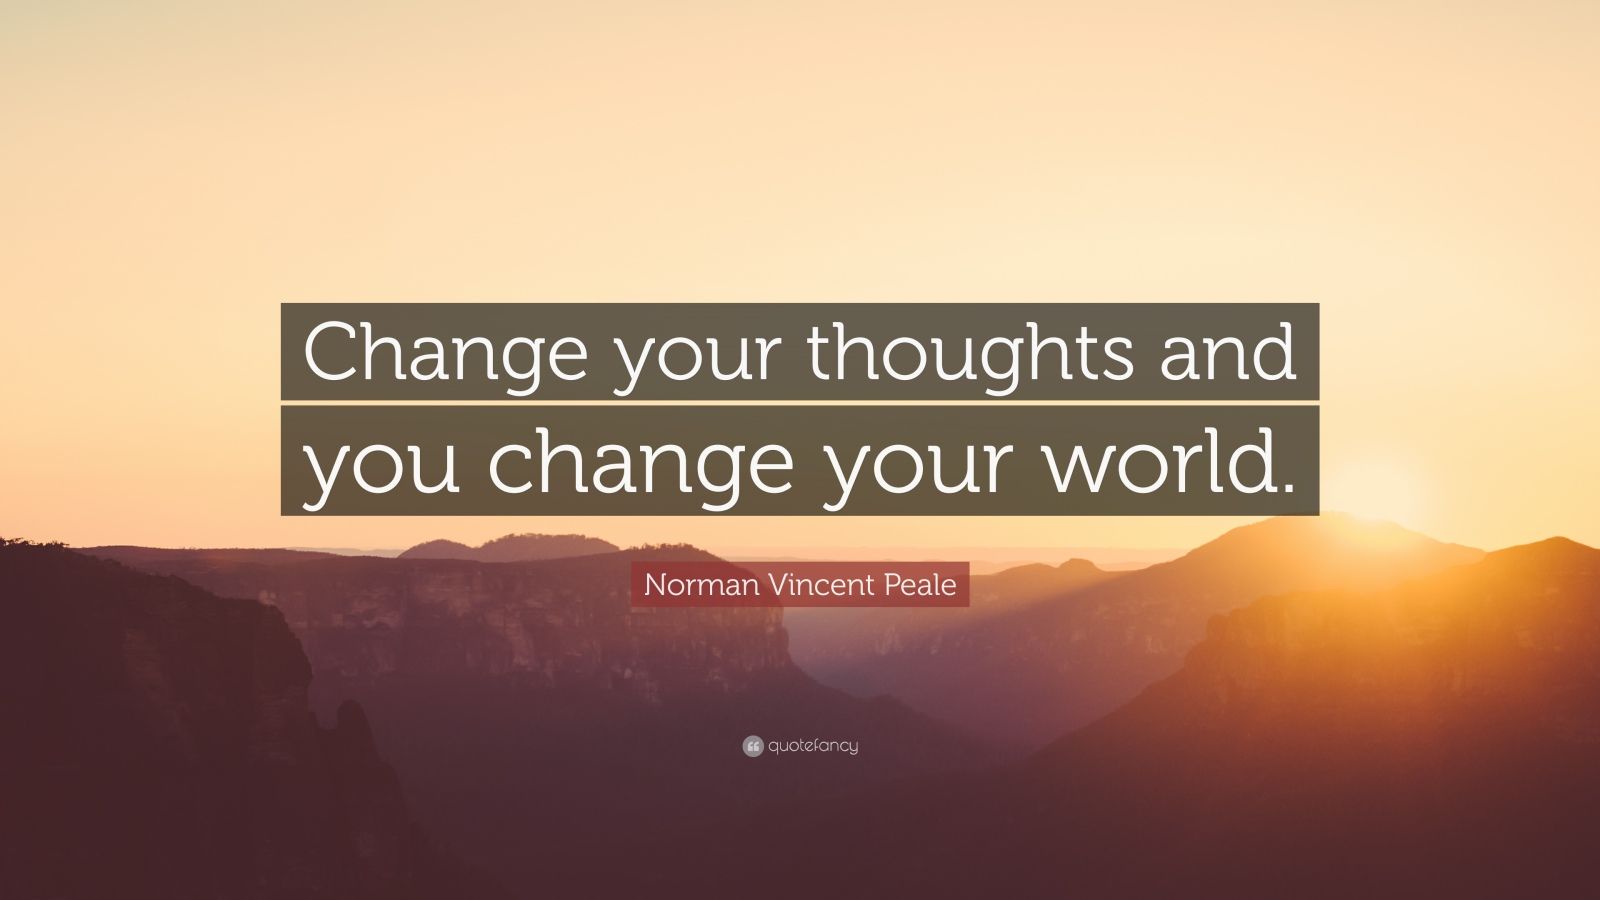 How To Change Your Thoughts To Positive